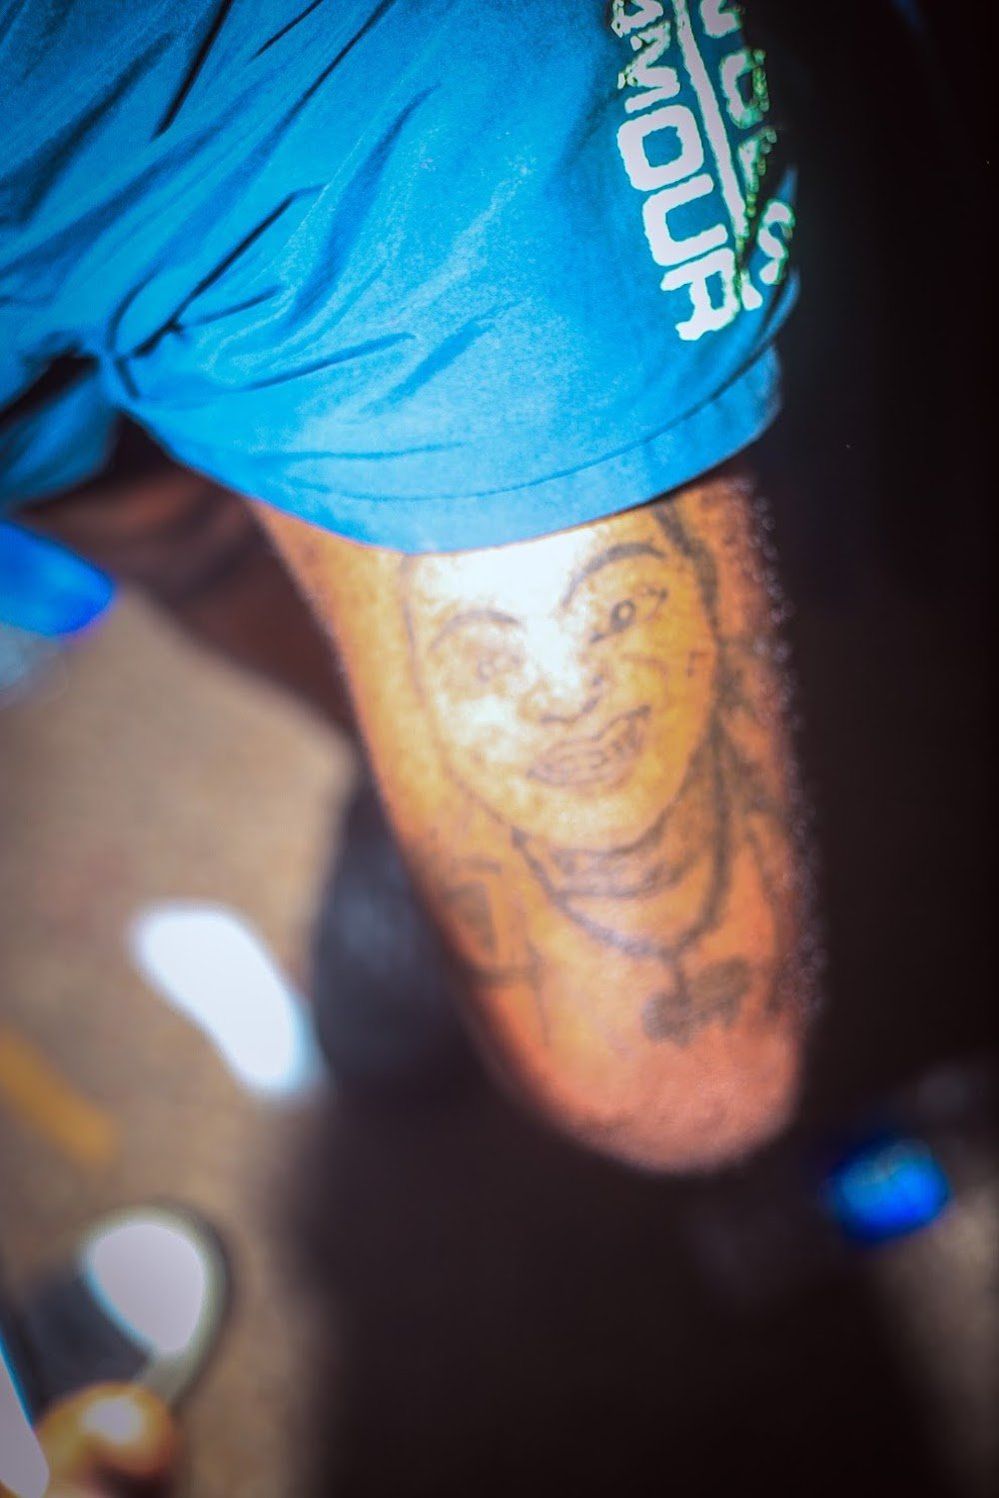 A tattoo of Davido spotted in the crowd.